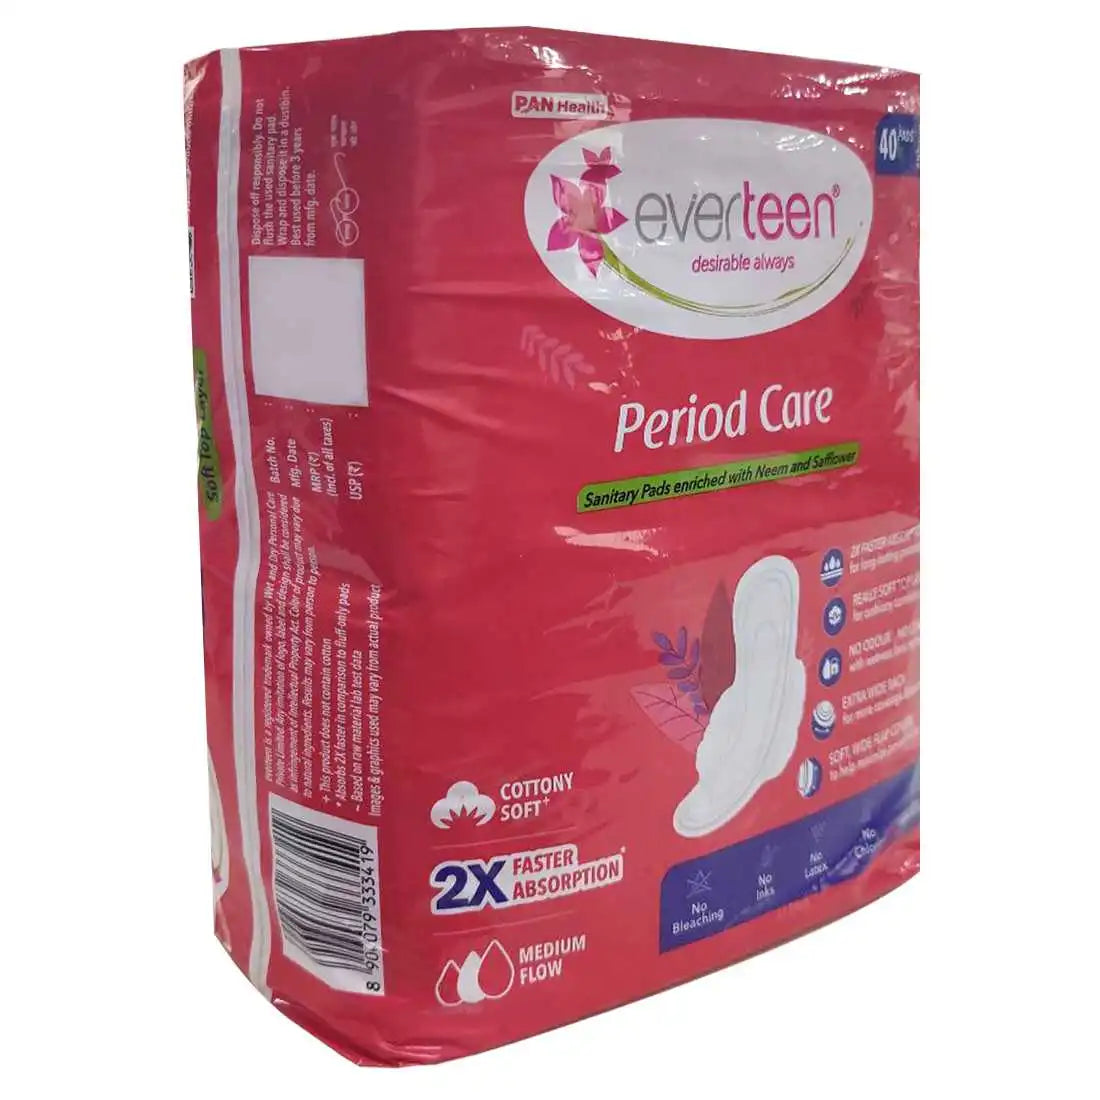 everteen Period Care XL Soft 40 Sanitary Pads Enriched with Neem and Safflower For Medium Flow